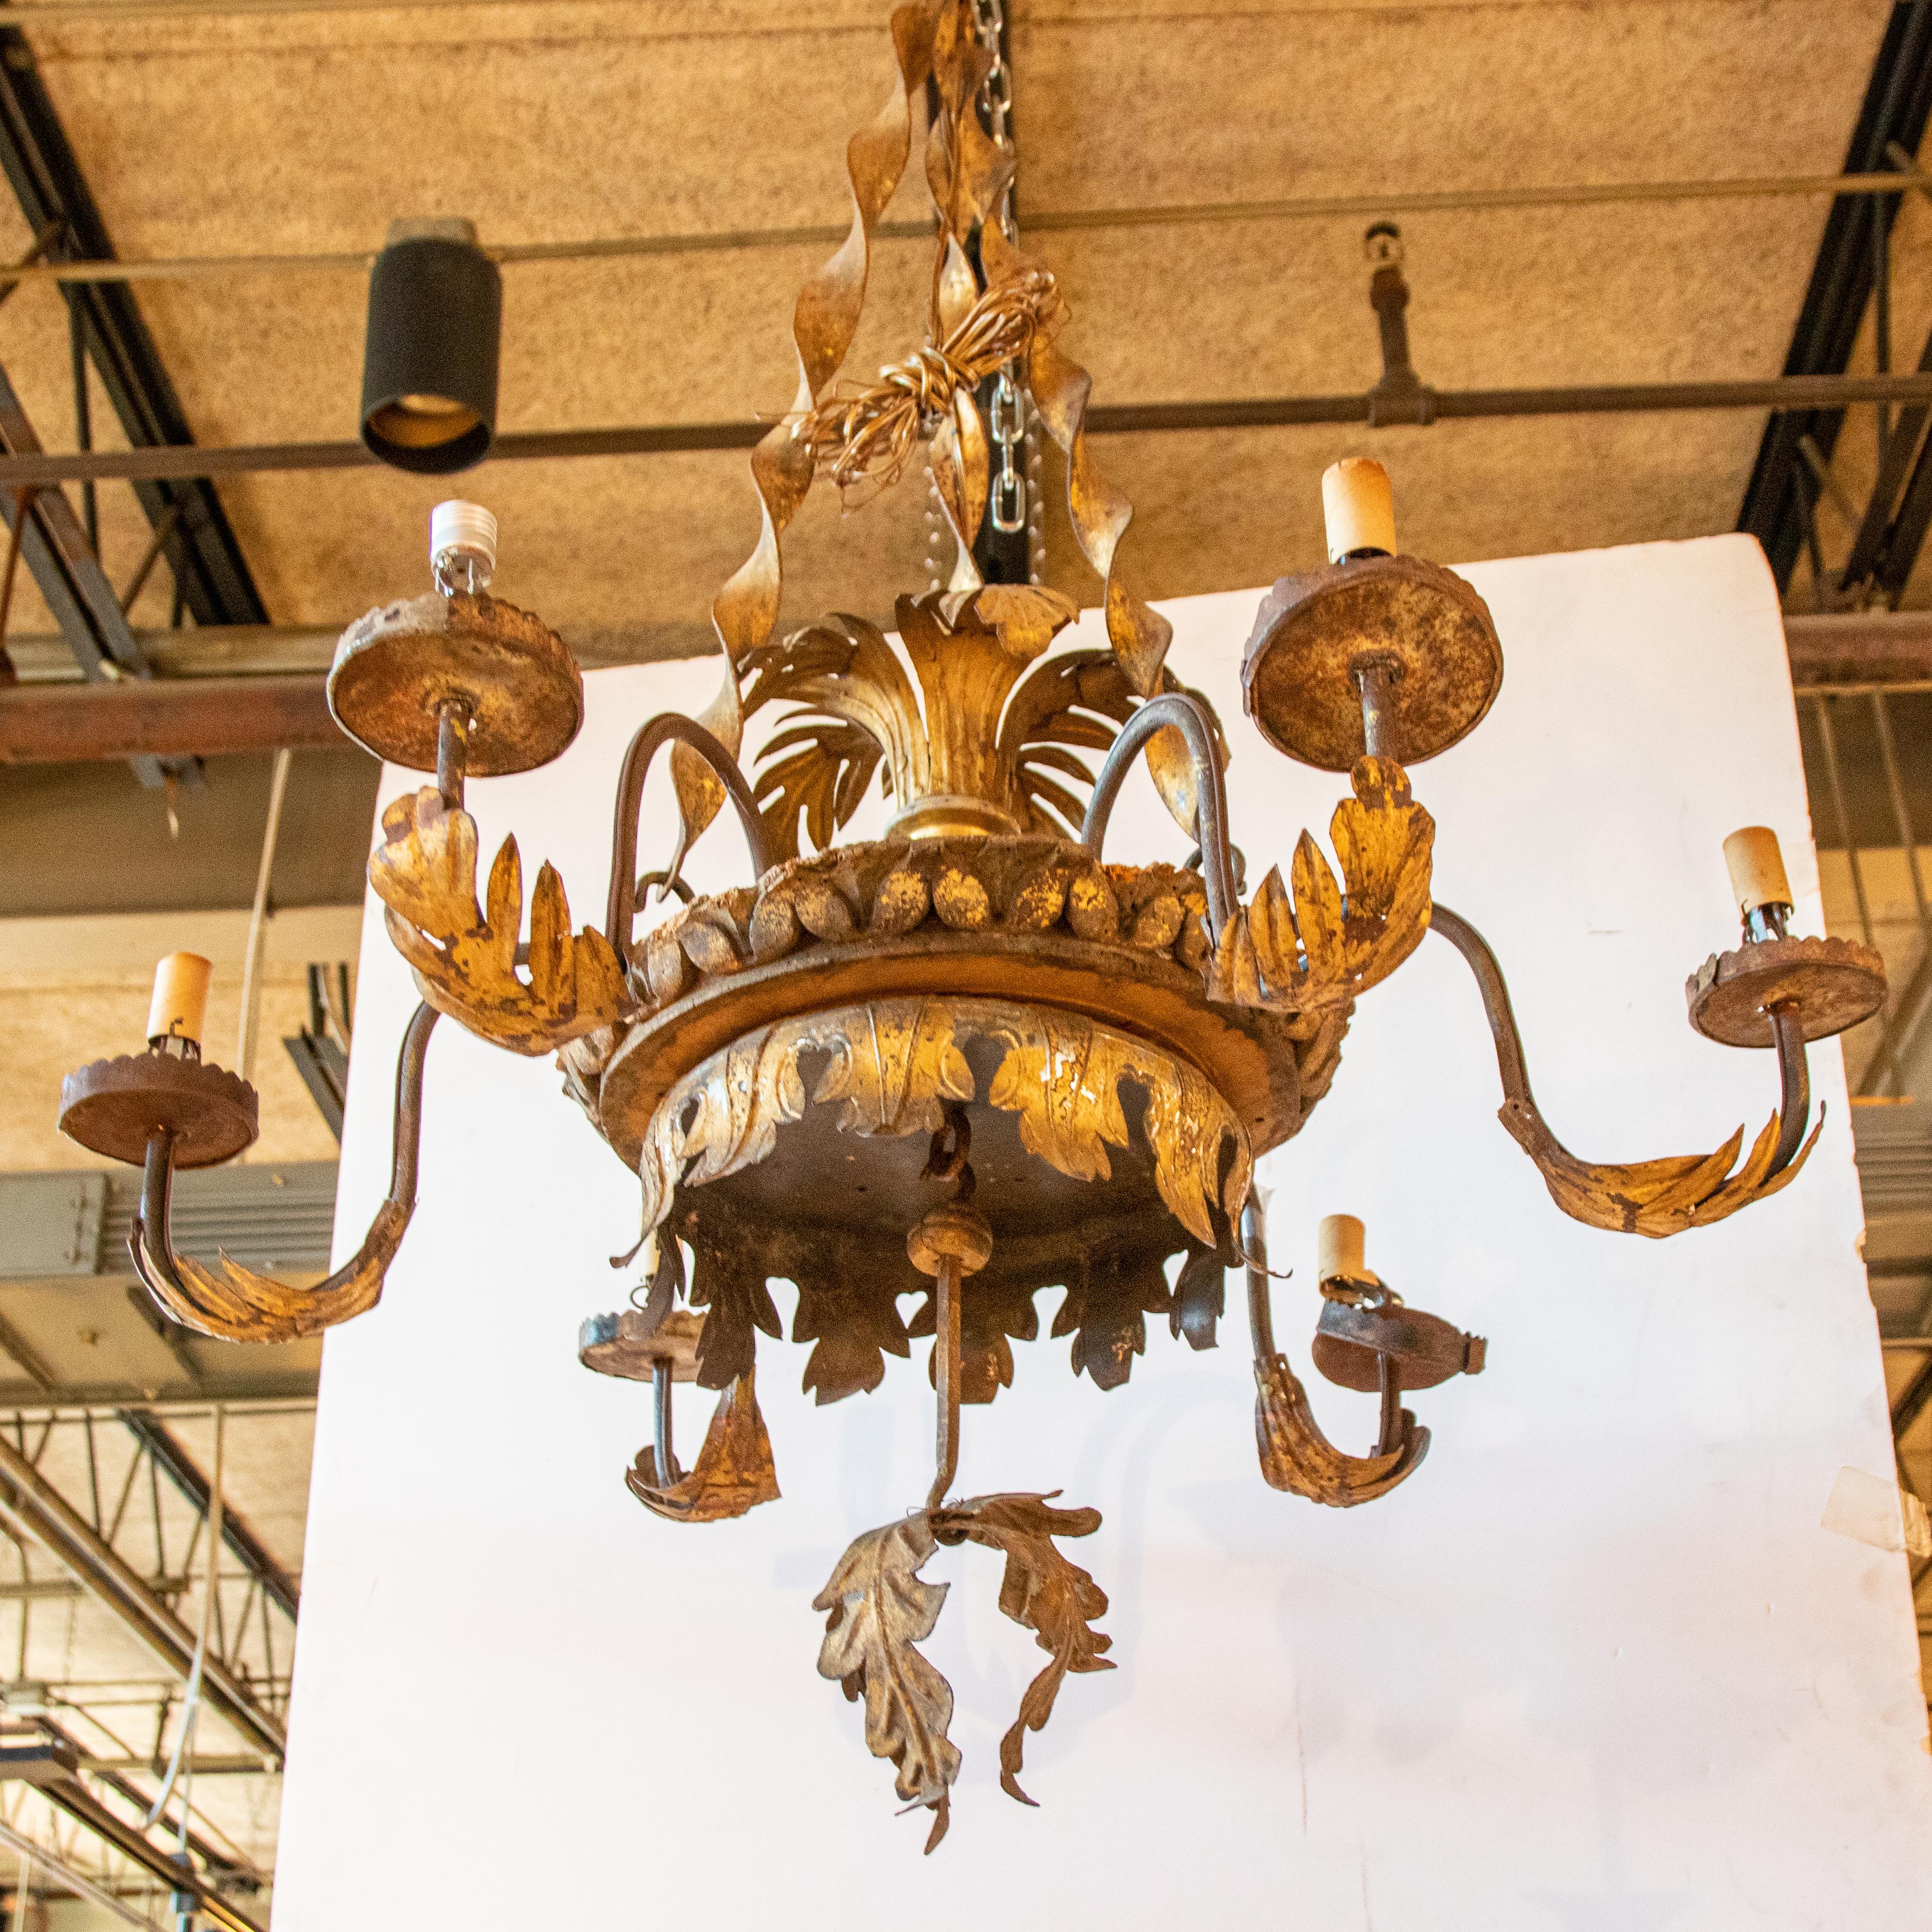 Gilded metal Continental style chandelier adorned with acanthus leaves throughout as seen on the arms of the chandelier. The canopy of the chandelier also uses acanthus leaves as decorative trim and a pendant finial suspended down the center. The